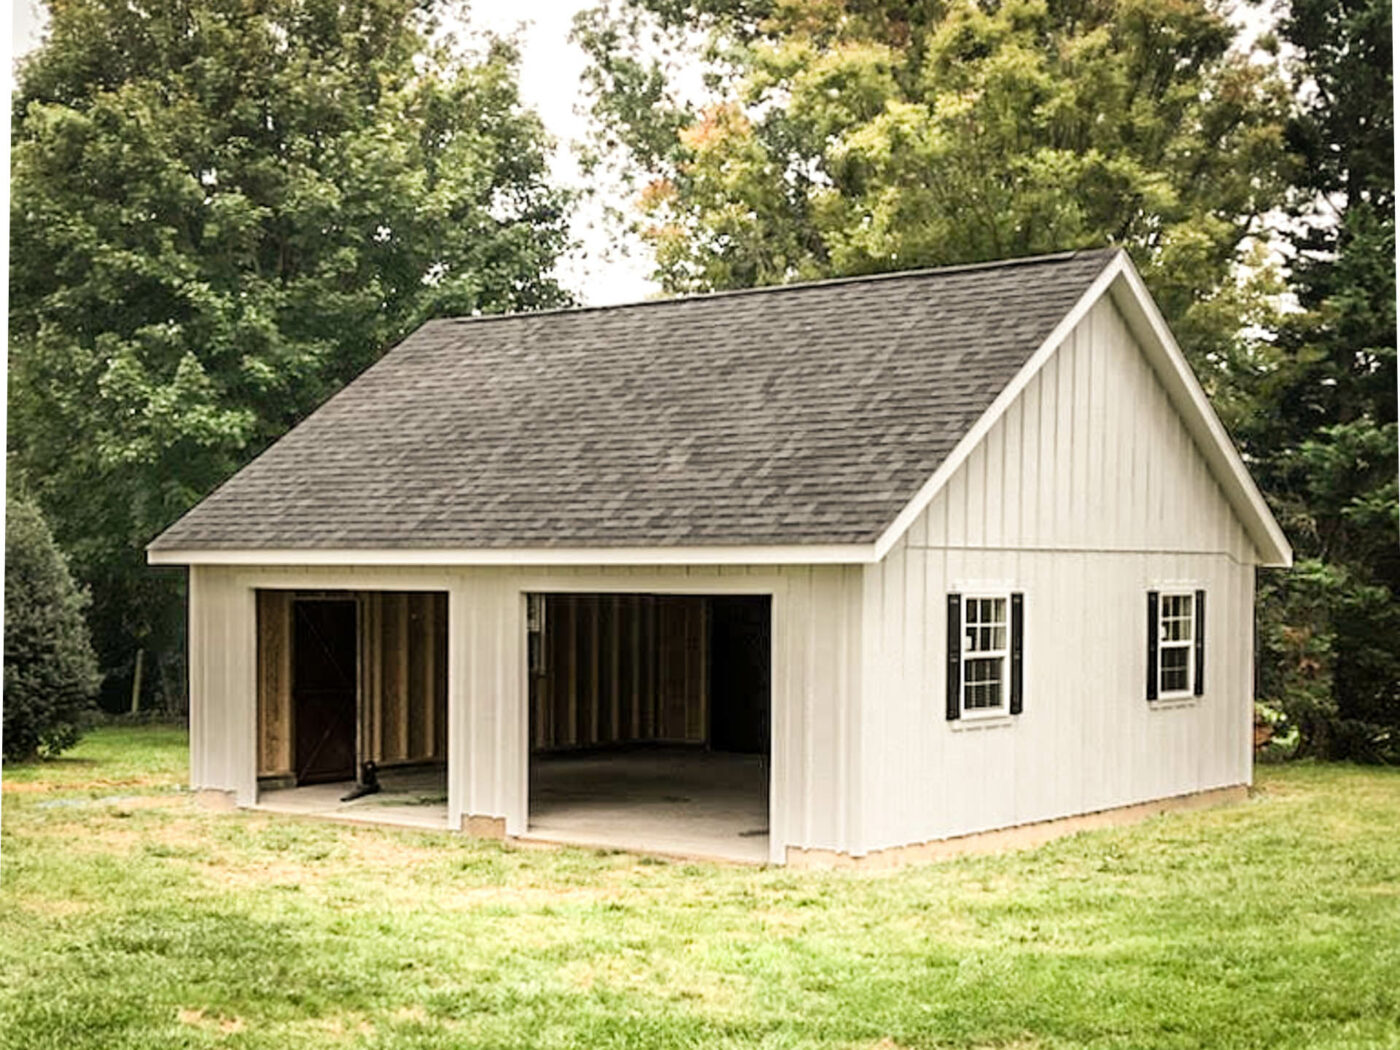 the exterior of a white Single-story Workshop 2-car garage in Mt. Airy, MD with black shutters